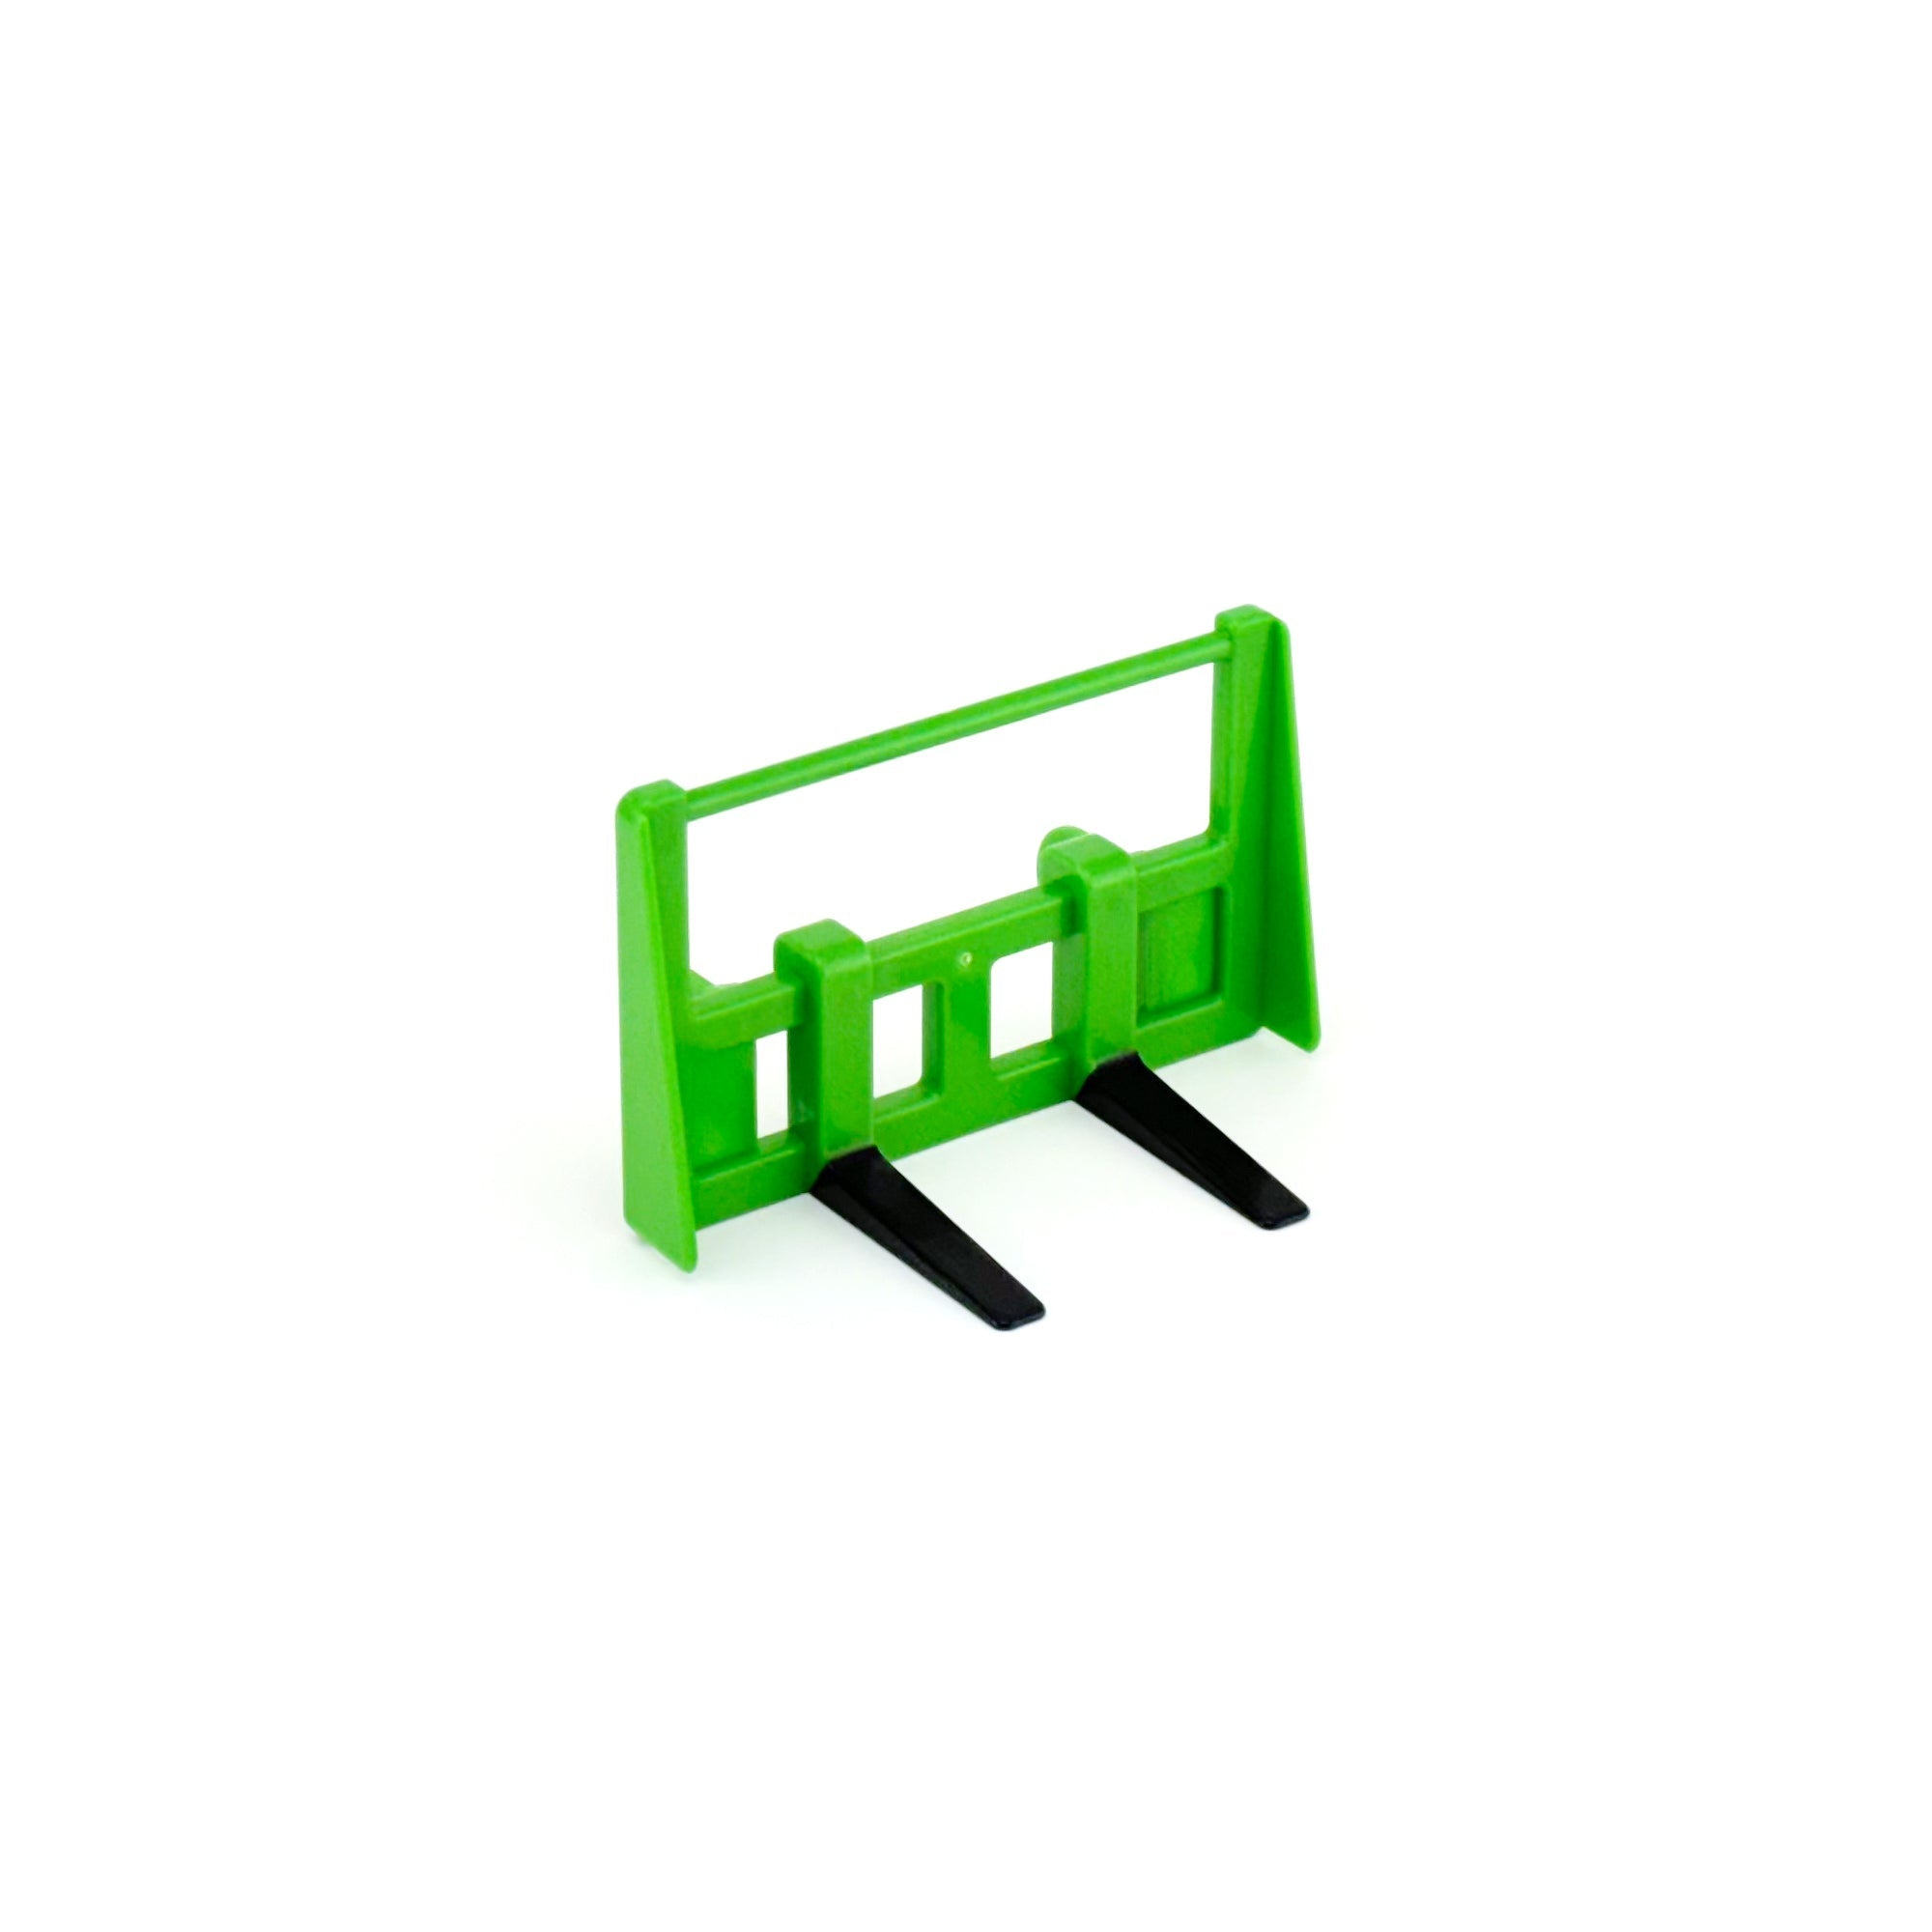 Green Tractor Forks